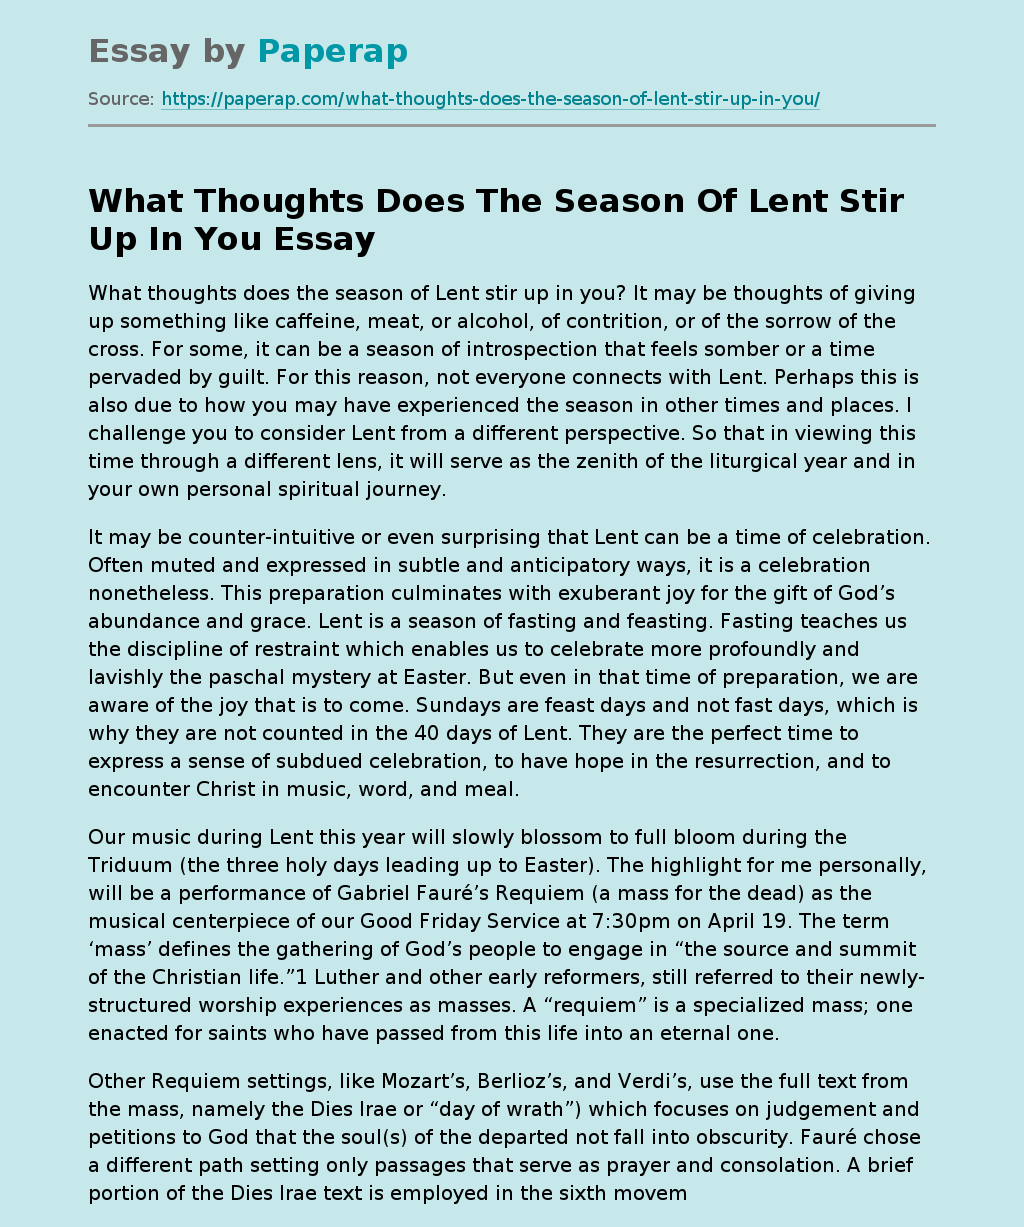 What Thoughts Does The Season Of Lent Stir Up In You